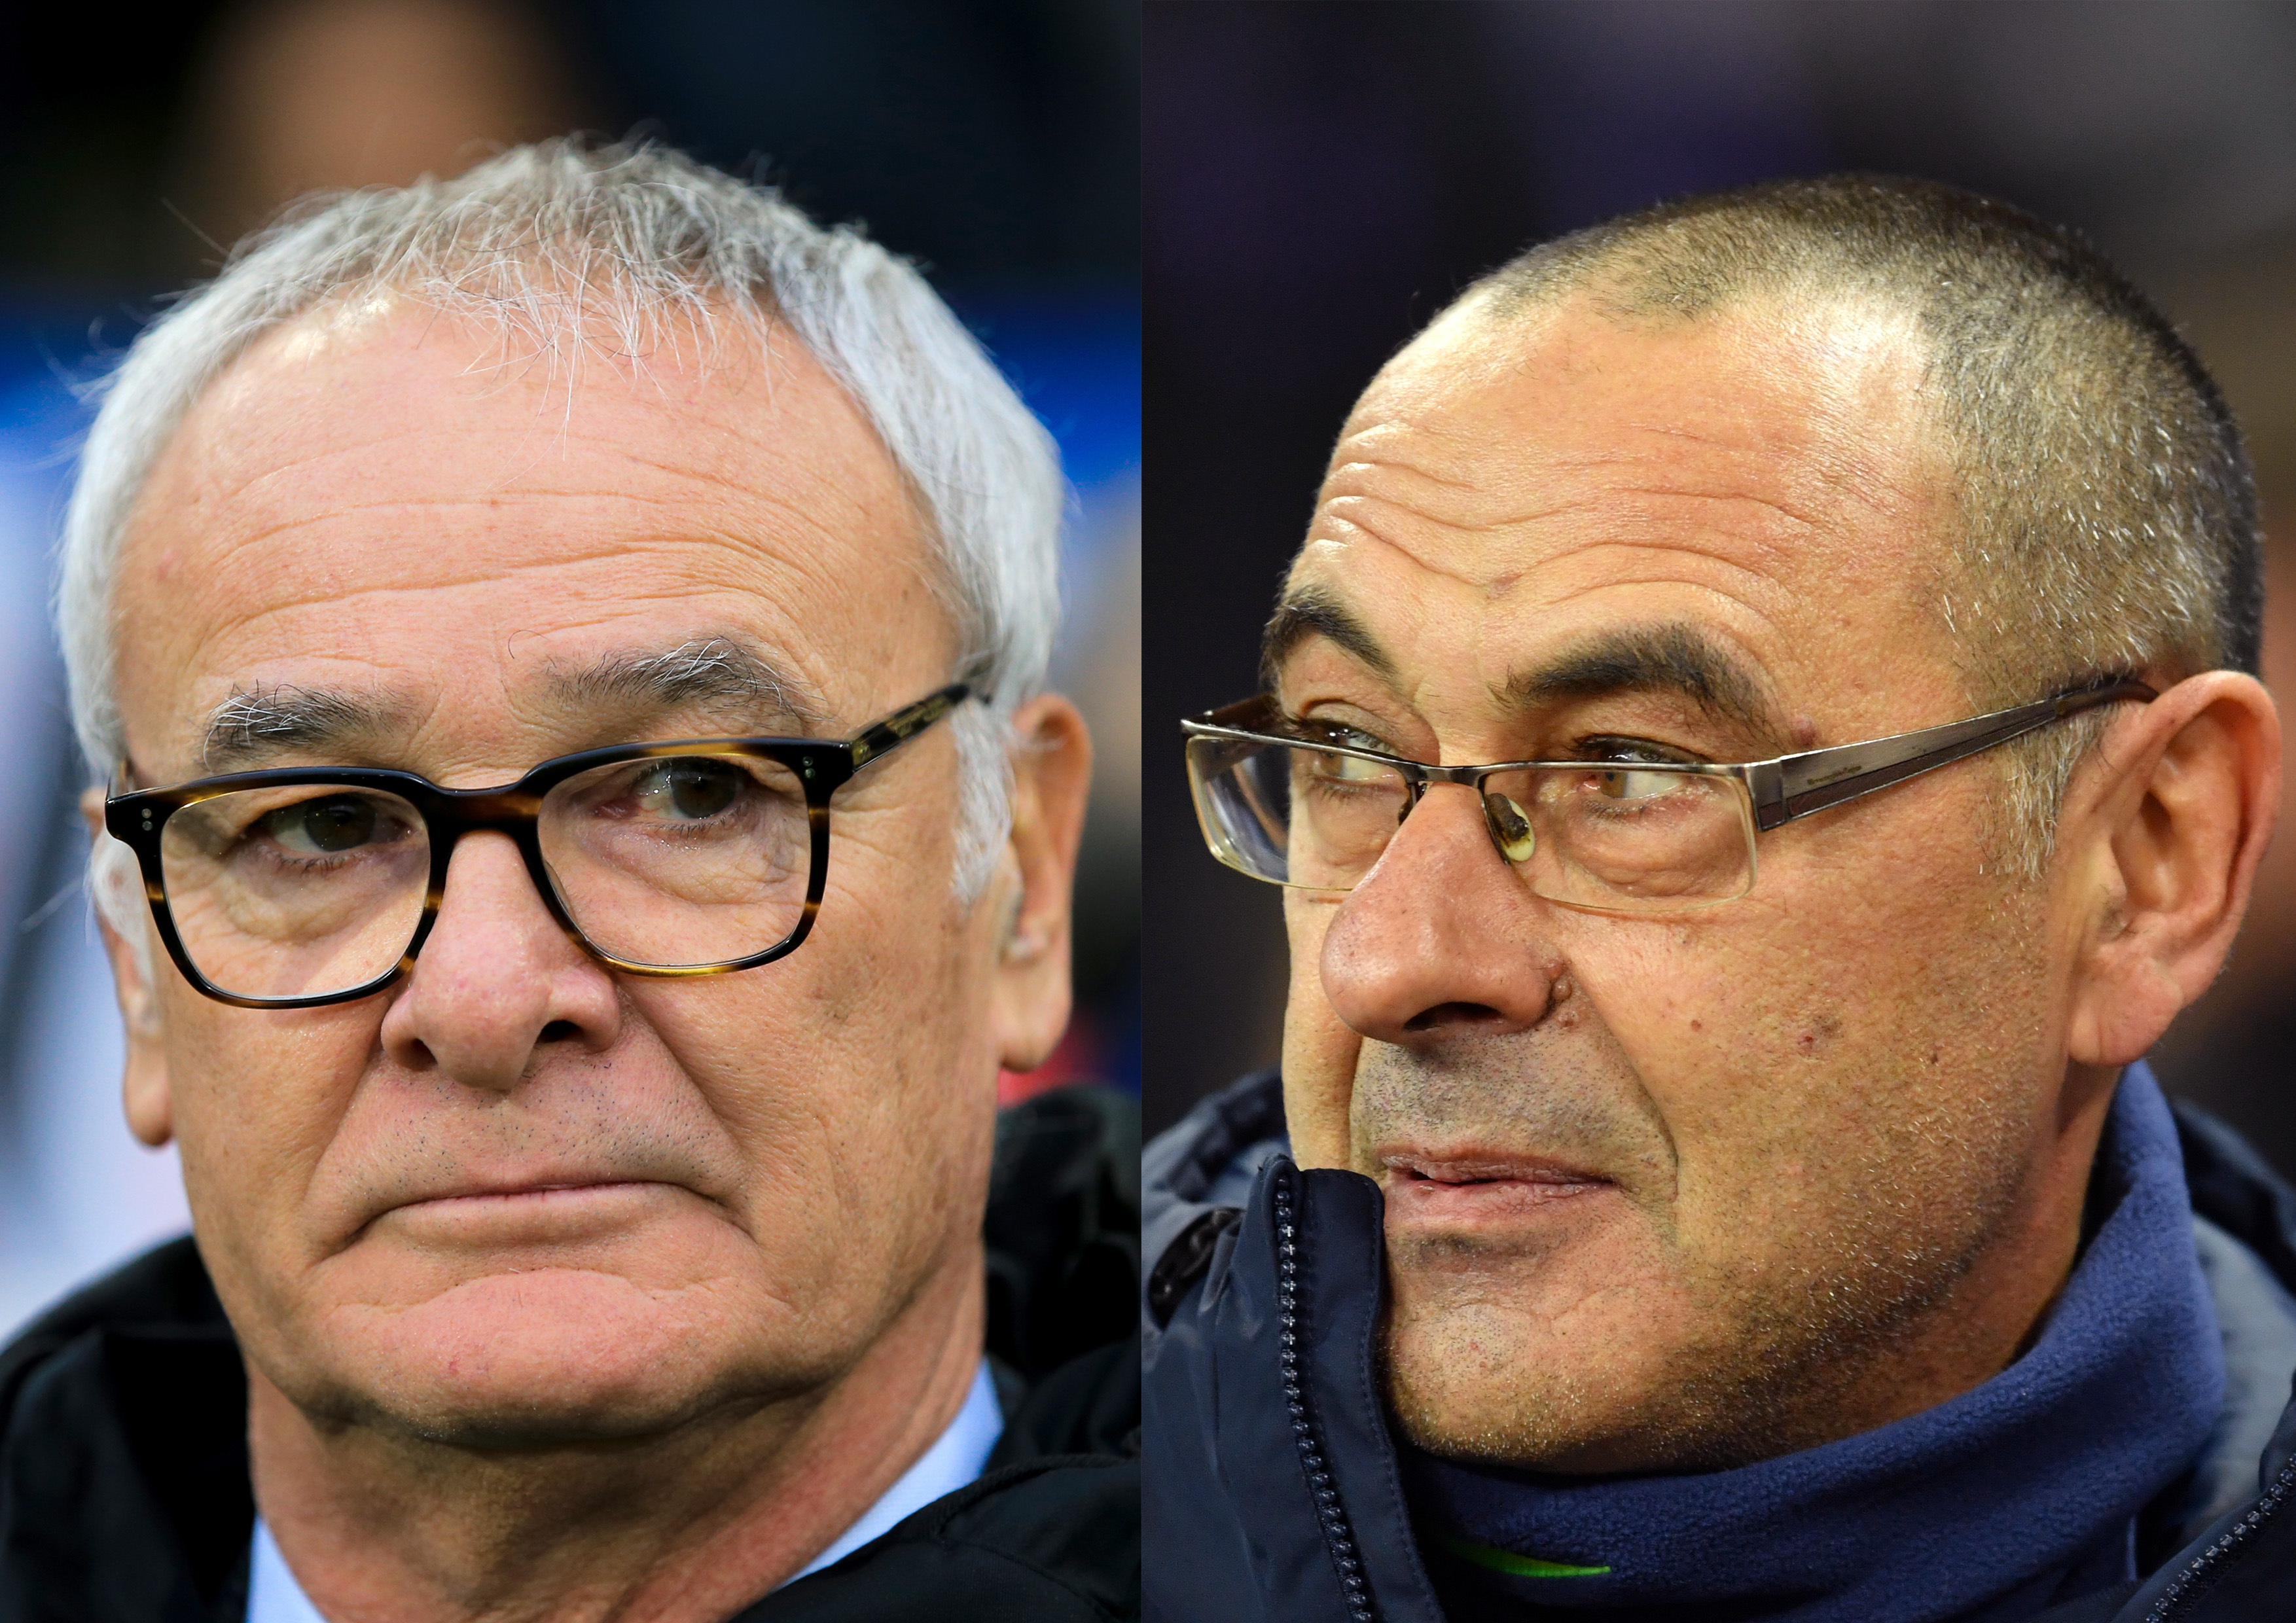 FILE PHOTO (EDITORS NOTE: COMPOSITE OF IMAGES - Image numbers 1064878678,1064777648) In this composite image a comparison has been made between   Claudio Ranieri manager of Fulham (L) and Maurizio Sarri, Manager of Chelsea.  Chelsea FC  and Fulham FC meet on December 2, 2018 at Stamford Bridge in London,England.  ***LEFT IMAGE*** LONDON, ENGLAND - NOVEMBER 24: Claudio Ranieri manager of Fulham during the Premier League match between Fulham FC and Southampton FC at Craven Cottage on November 24, 2018 in London, United Kingdom. (Photo by Marc Atkins/Getty Images) ***RIGHT IMAGE***  LONDON, ENGLAND - NOVEMBER 24: Maurizio Sarri, Manager of Chelsea looks on prior to the Premier League match between Tottenham Hotspur and Chelsea FC at Tottenham Hotspur Stadium on November 24, 2018 in London, United Kingdom. (Photo by Mike Hewitt/Getty Images)